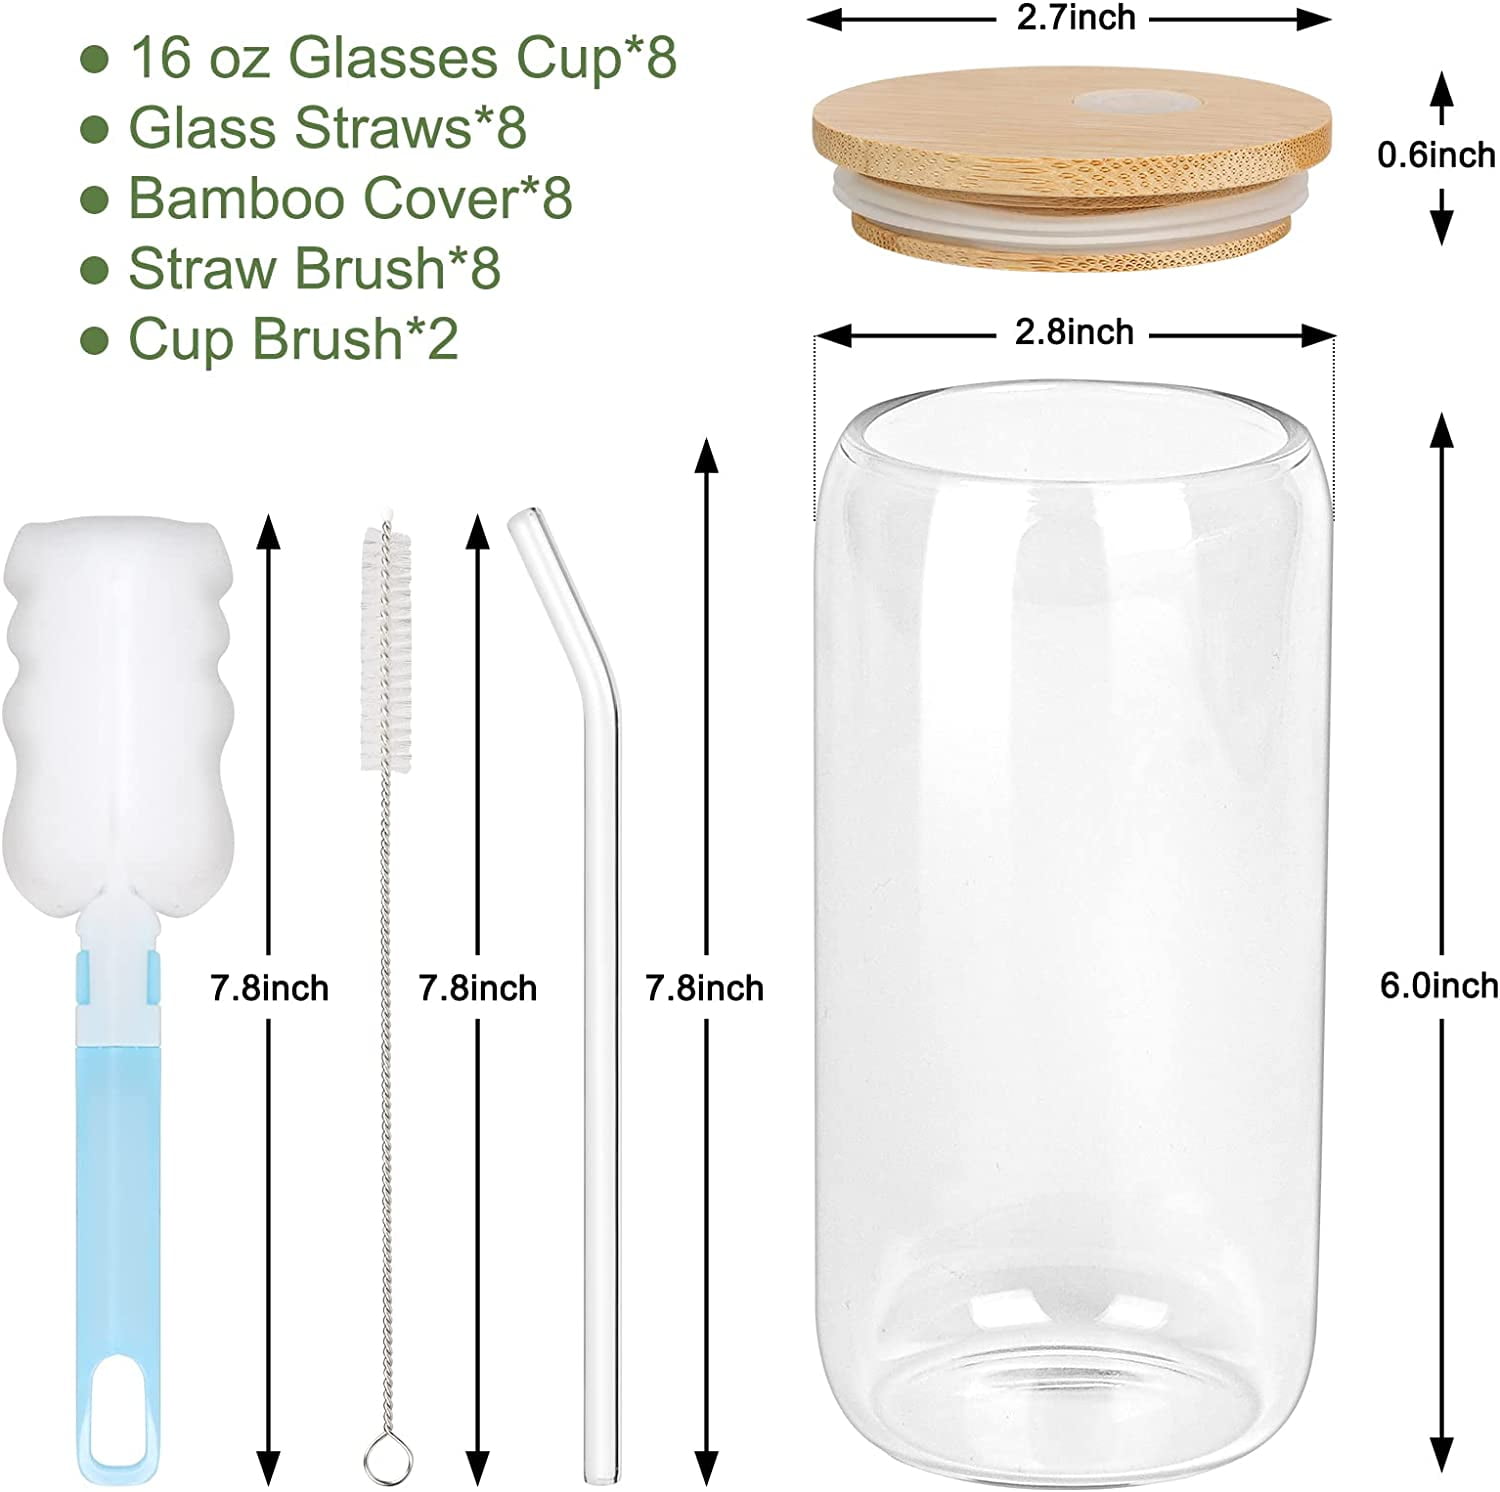 HuaQi Glass Cups with Lids and Straws 6pcs Set, Beer Glasses with